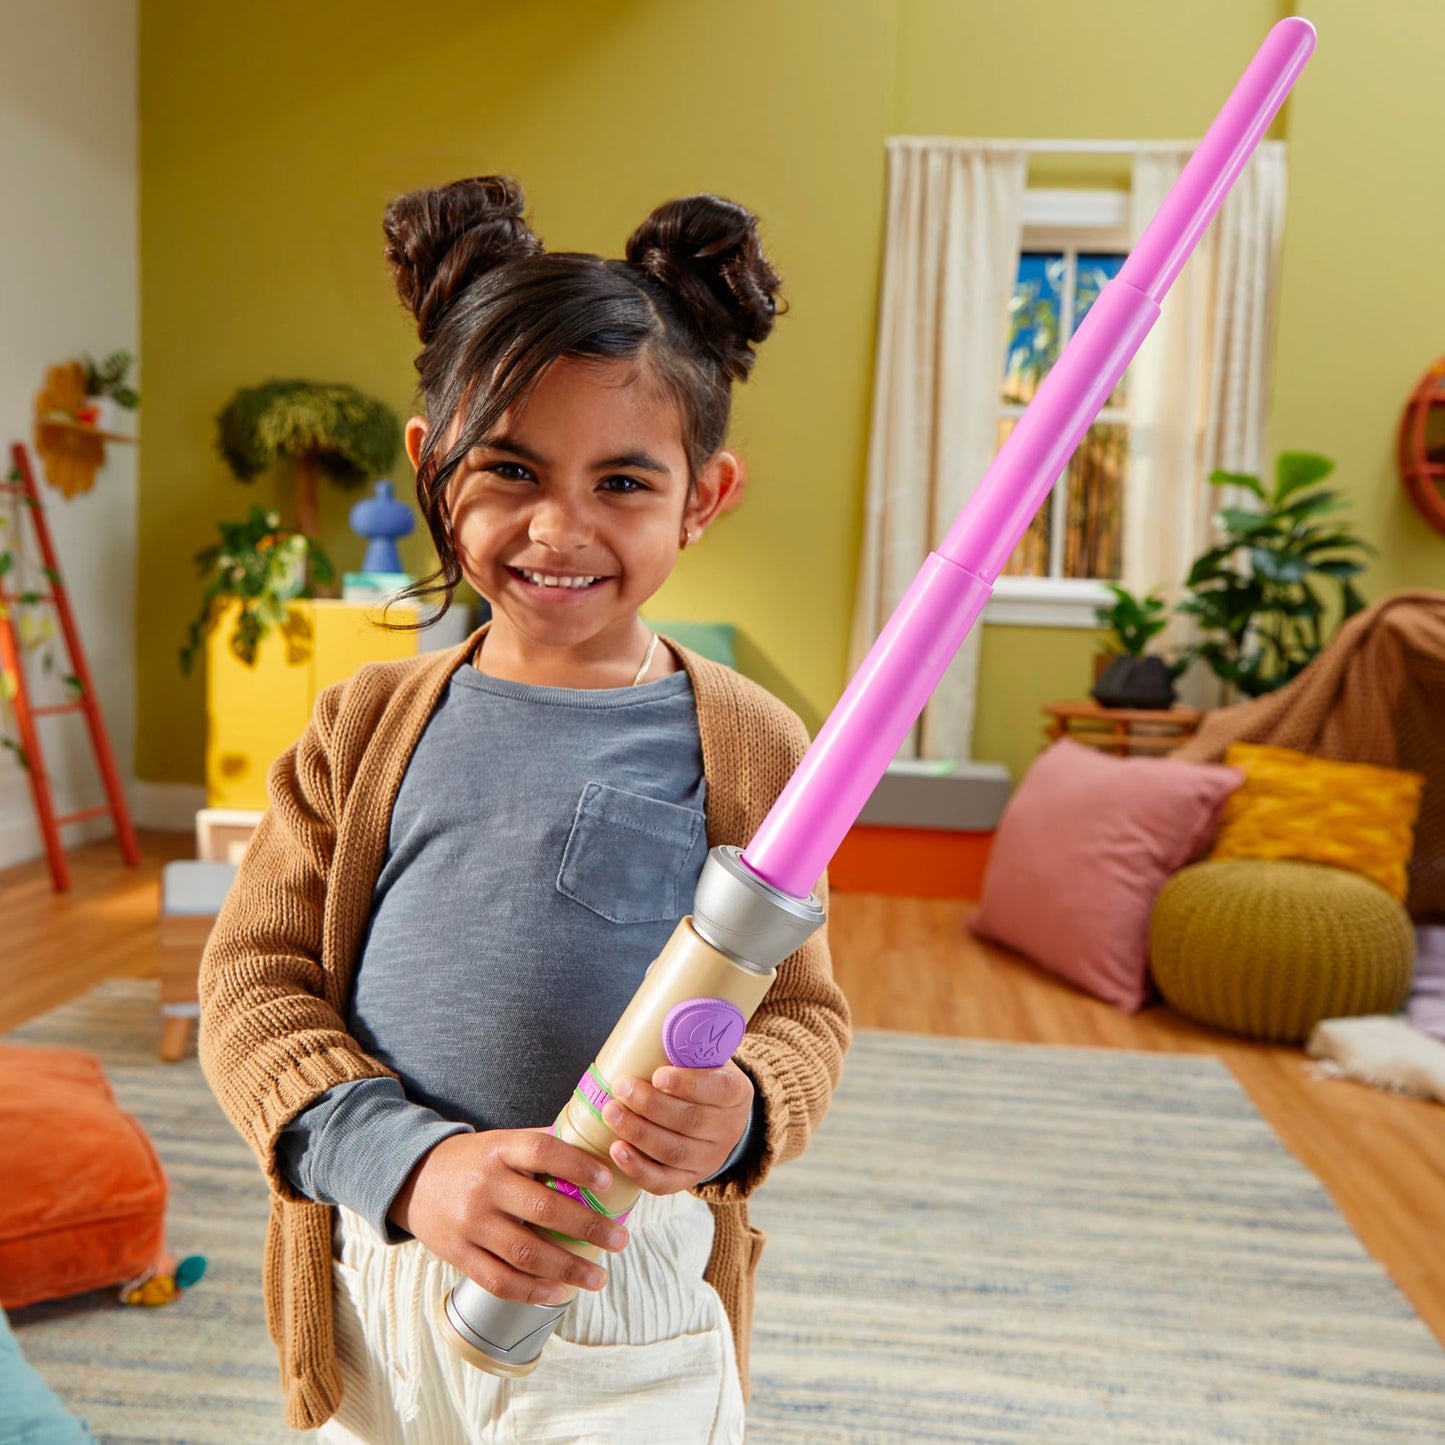 Star Wars Young Jedi Adventures - Lys Solay Training Lightsaber